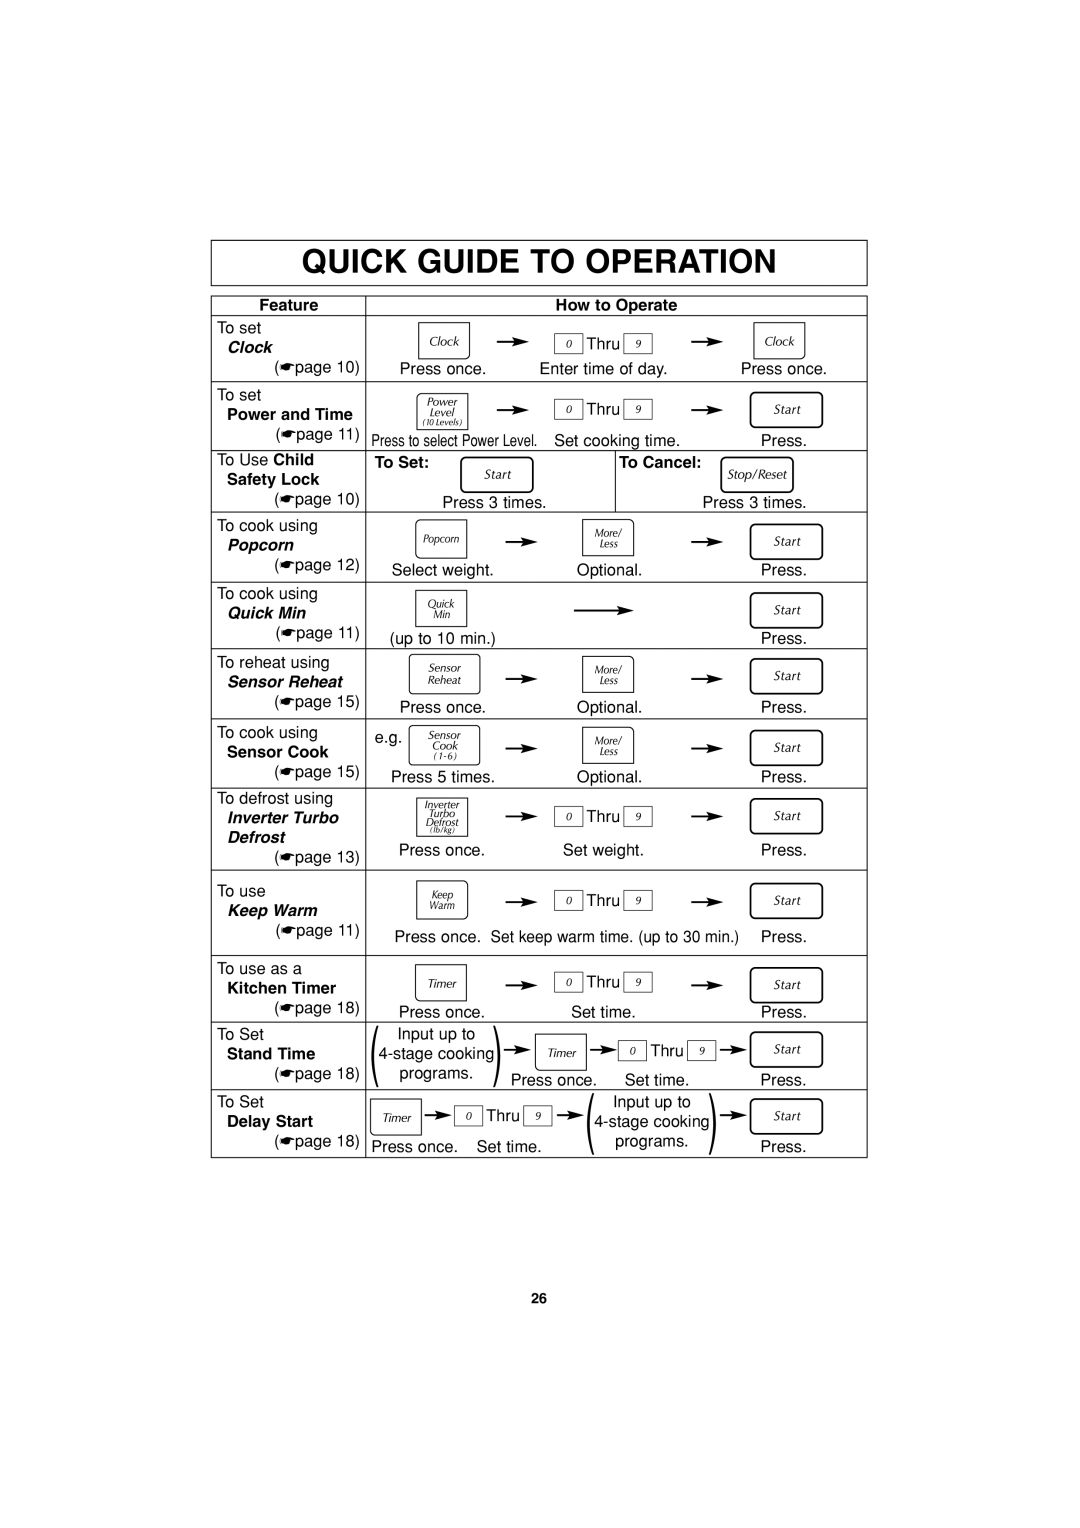 Panasonic NN-S443 Quick Guide To Operation, Feature, How to Operate, Clock, Power and Time, To Set, To Cancel, Safety Lock 